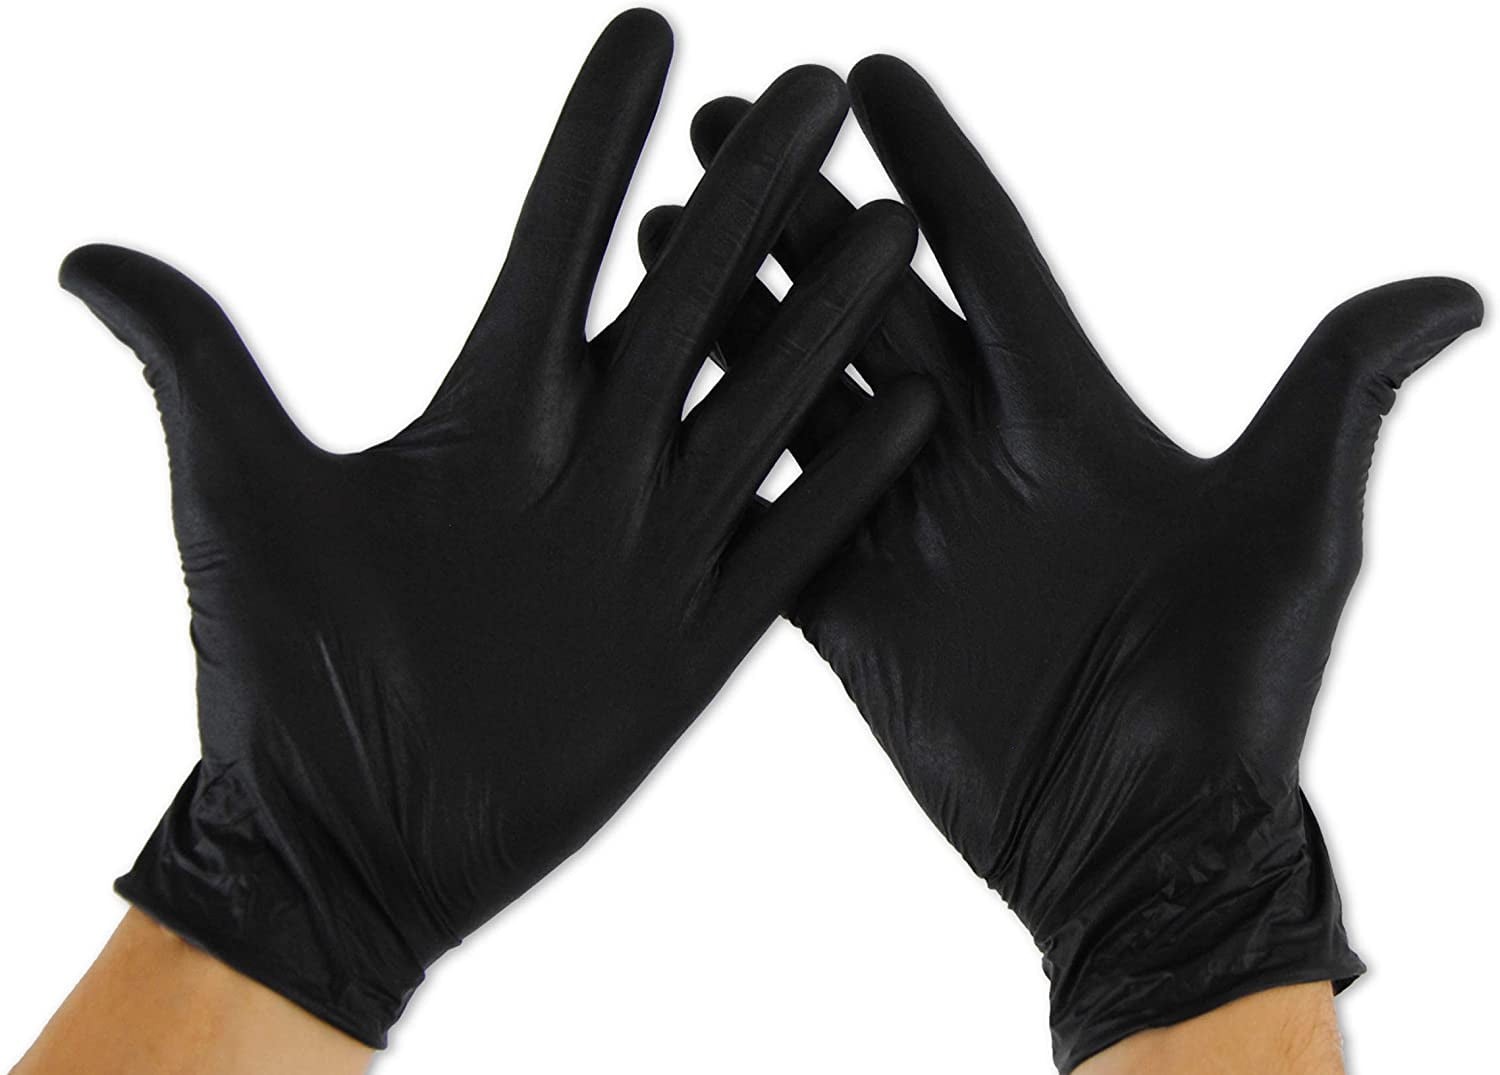 Size M Commercial Powder Free Disposable Nitrile Gloves 6 mil 100 per Pack Black 240mm 